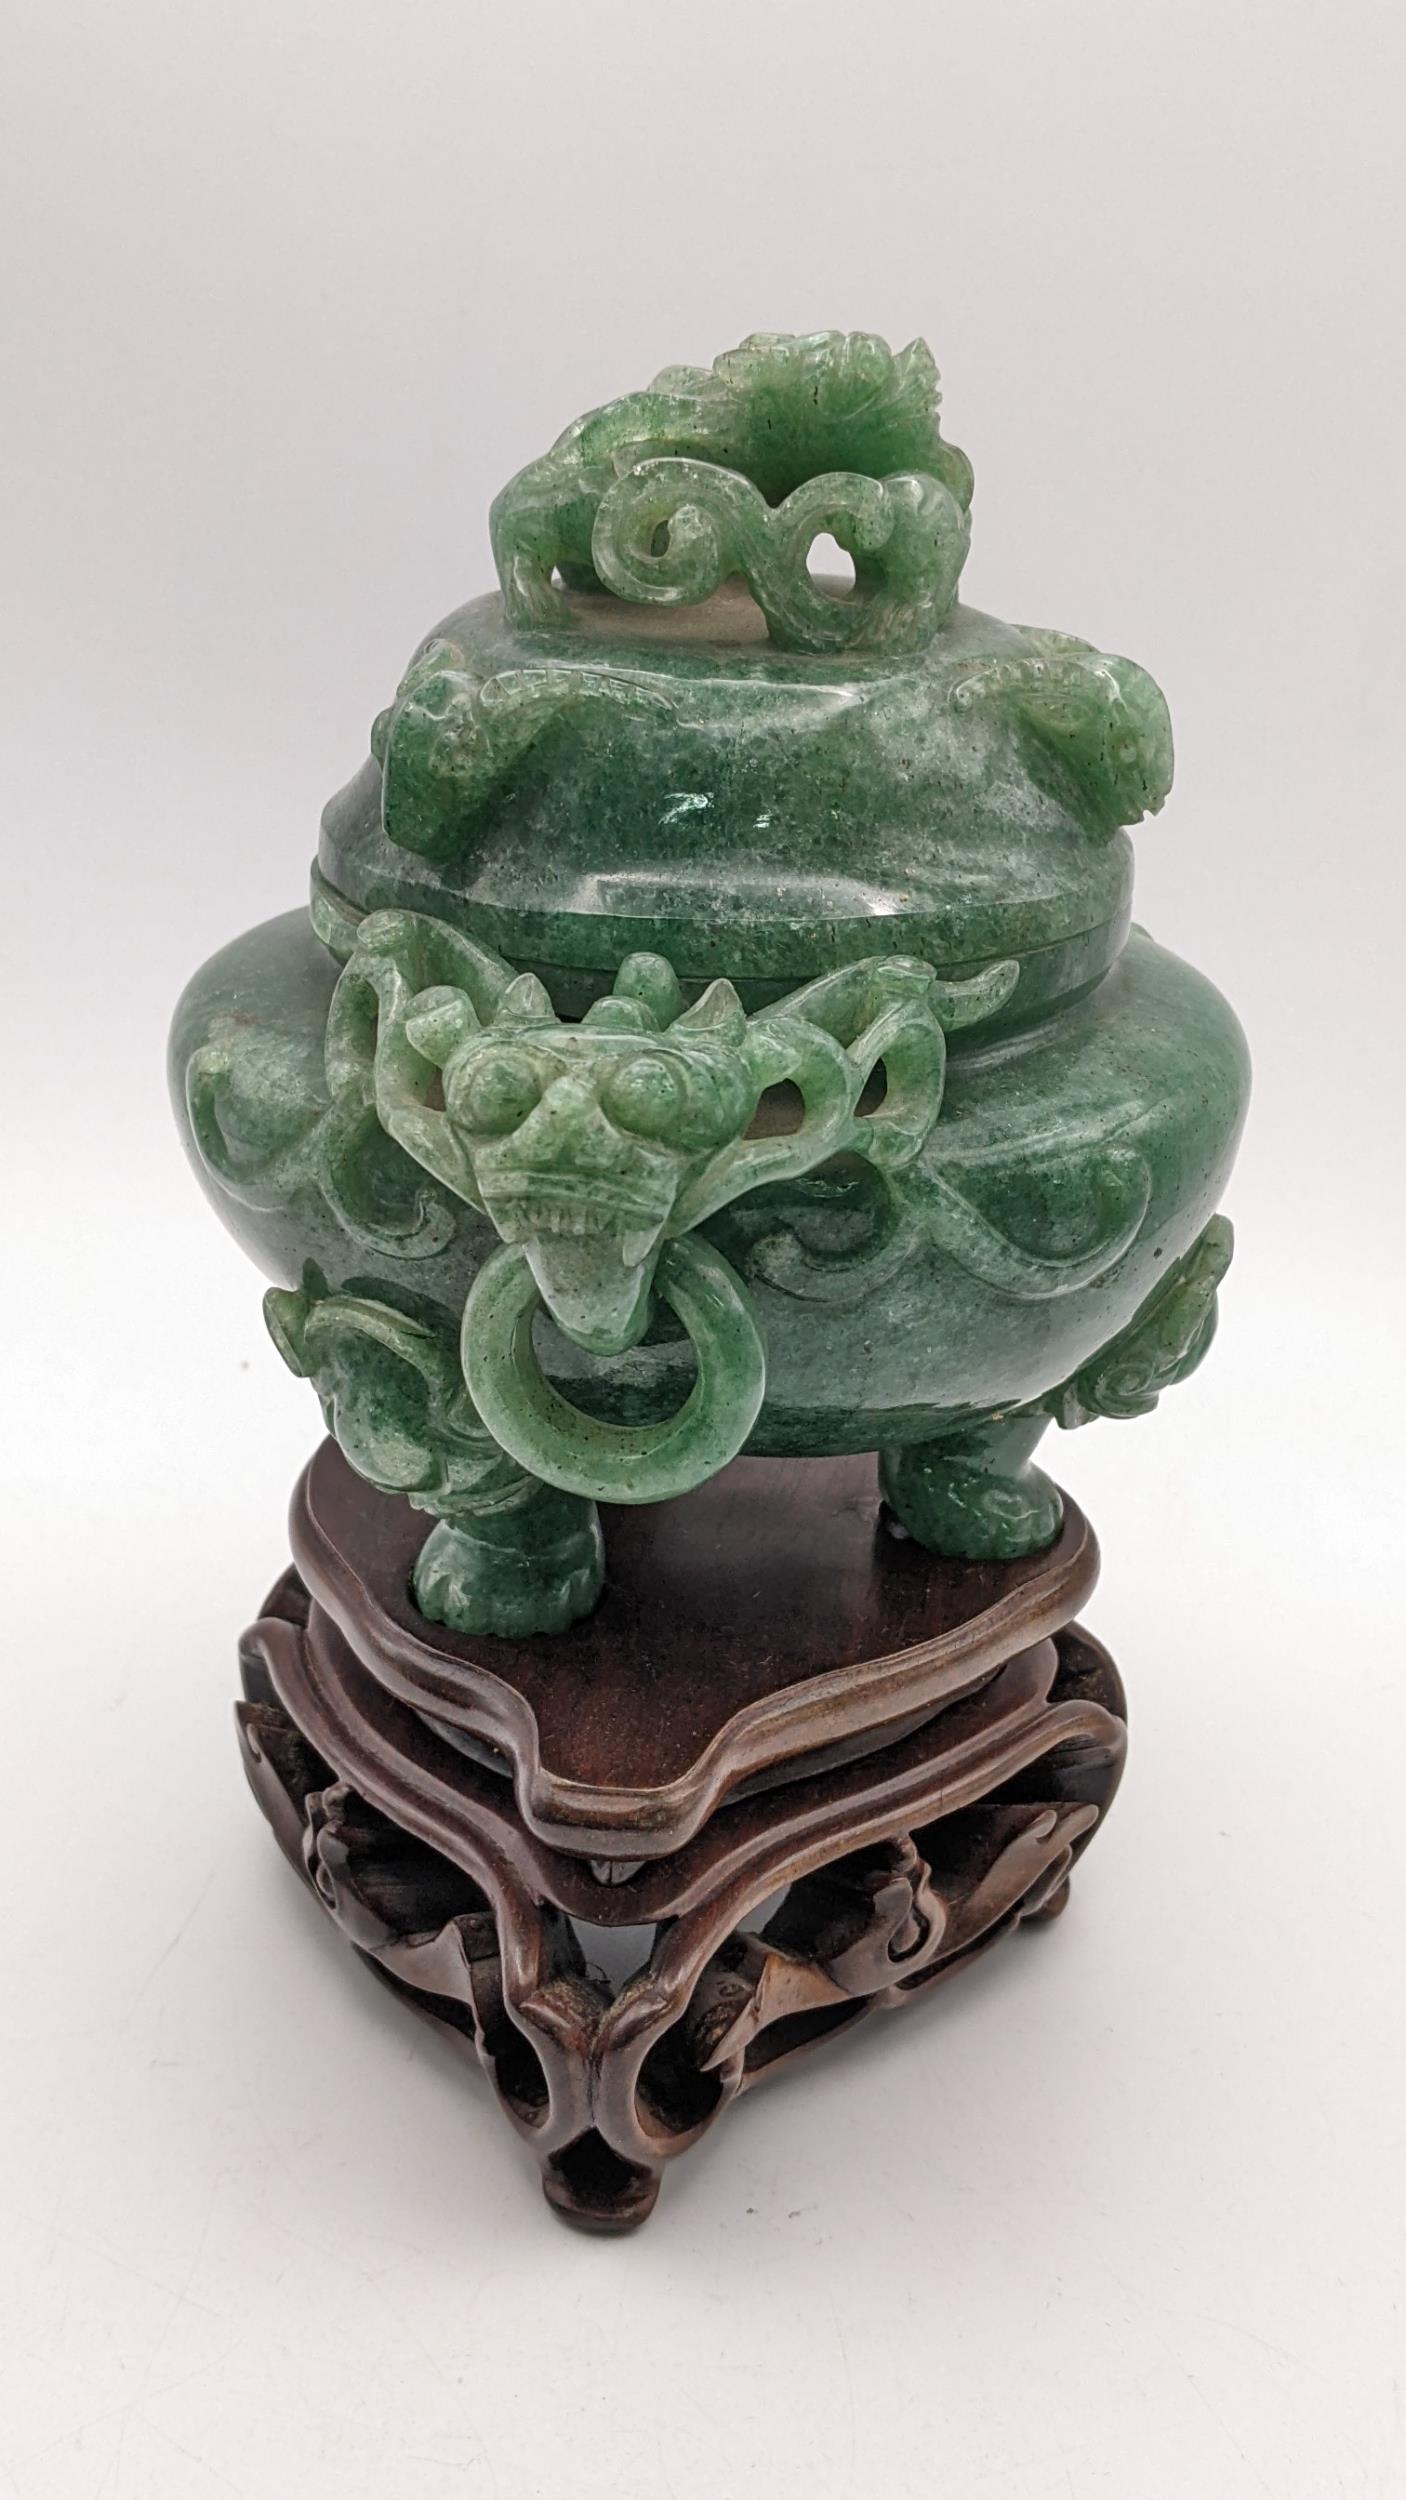 A 20th century Chinese jade censor, the lid decorated with a coiled dragon - Image 4 of 5